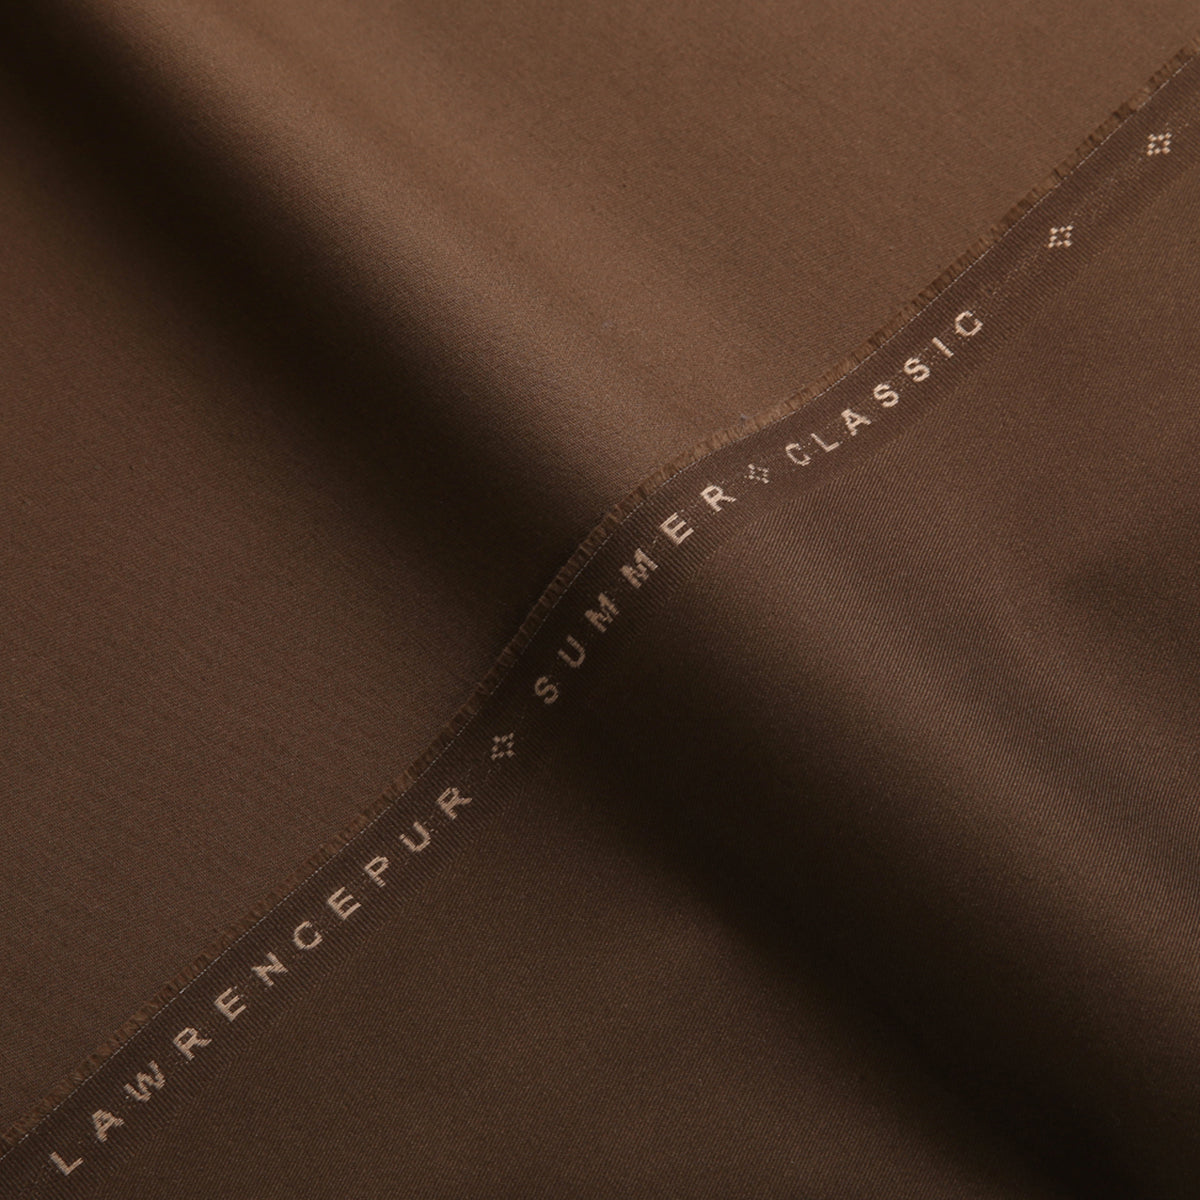 Plain-Olive, Summer Classic Cotton Trousering Fabric